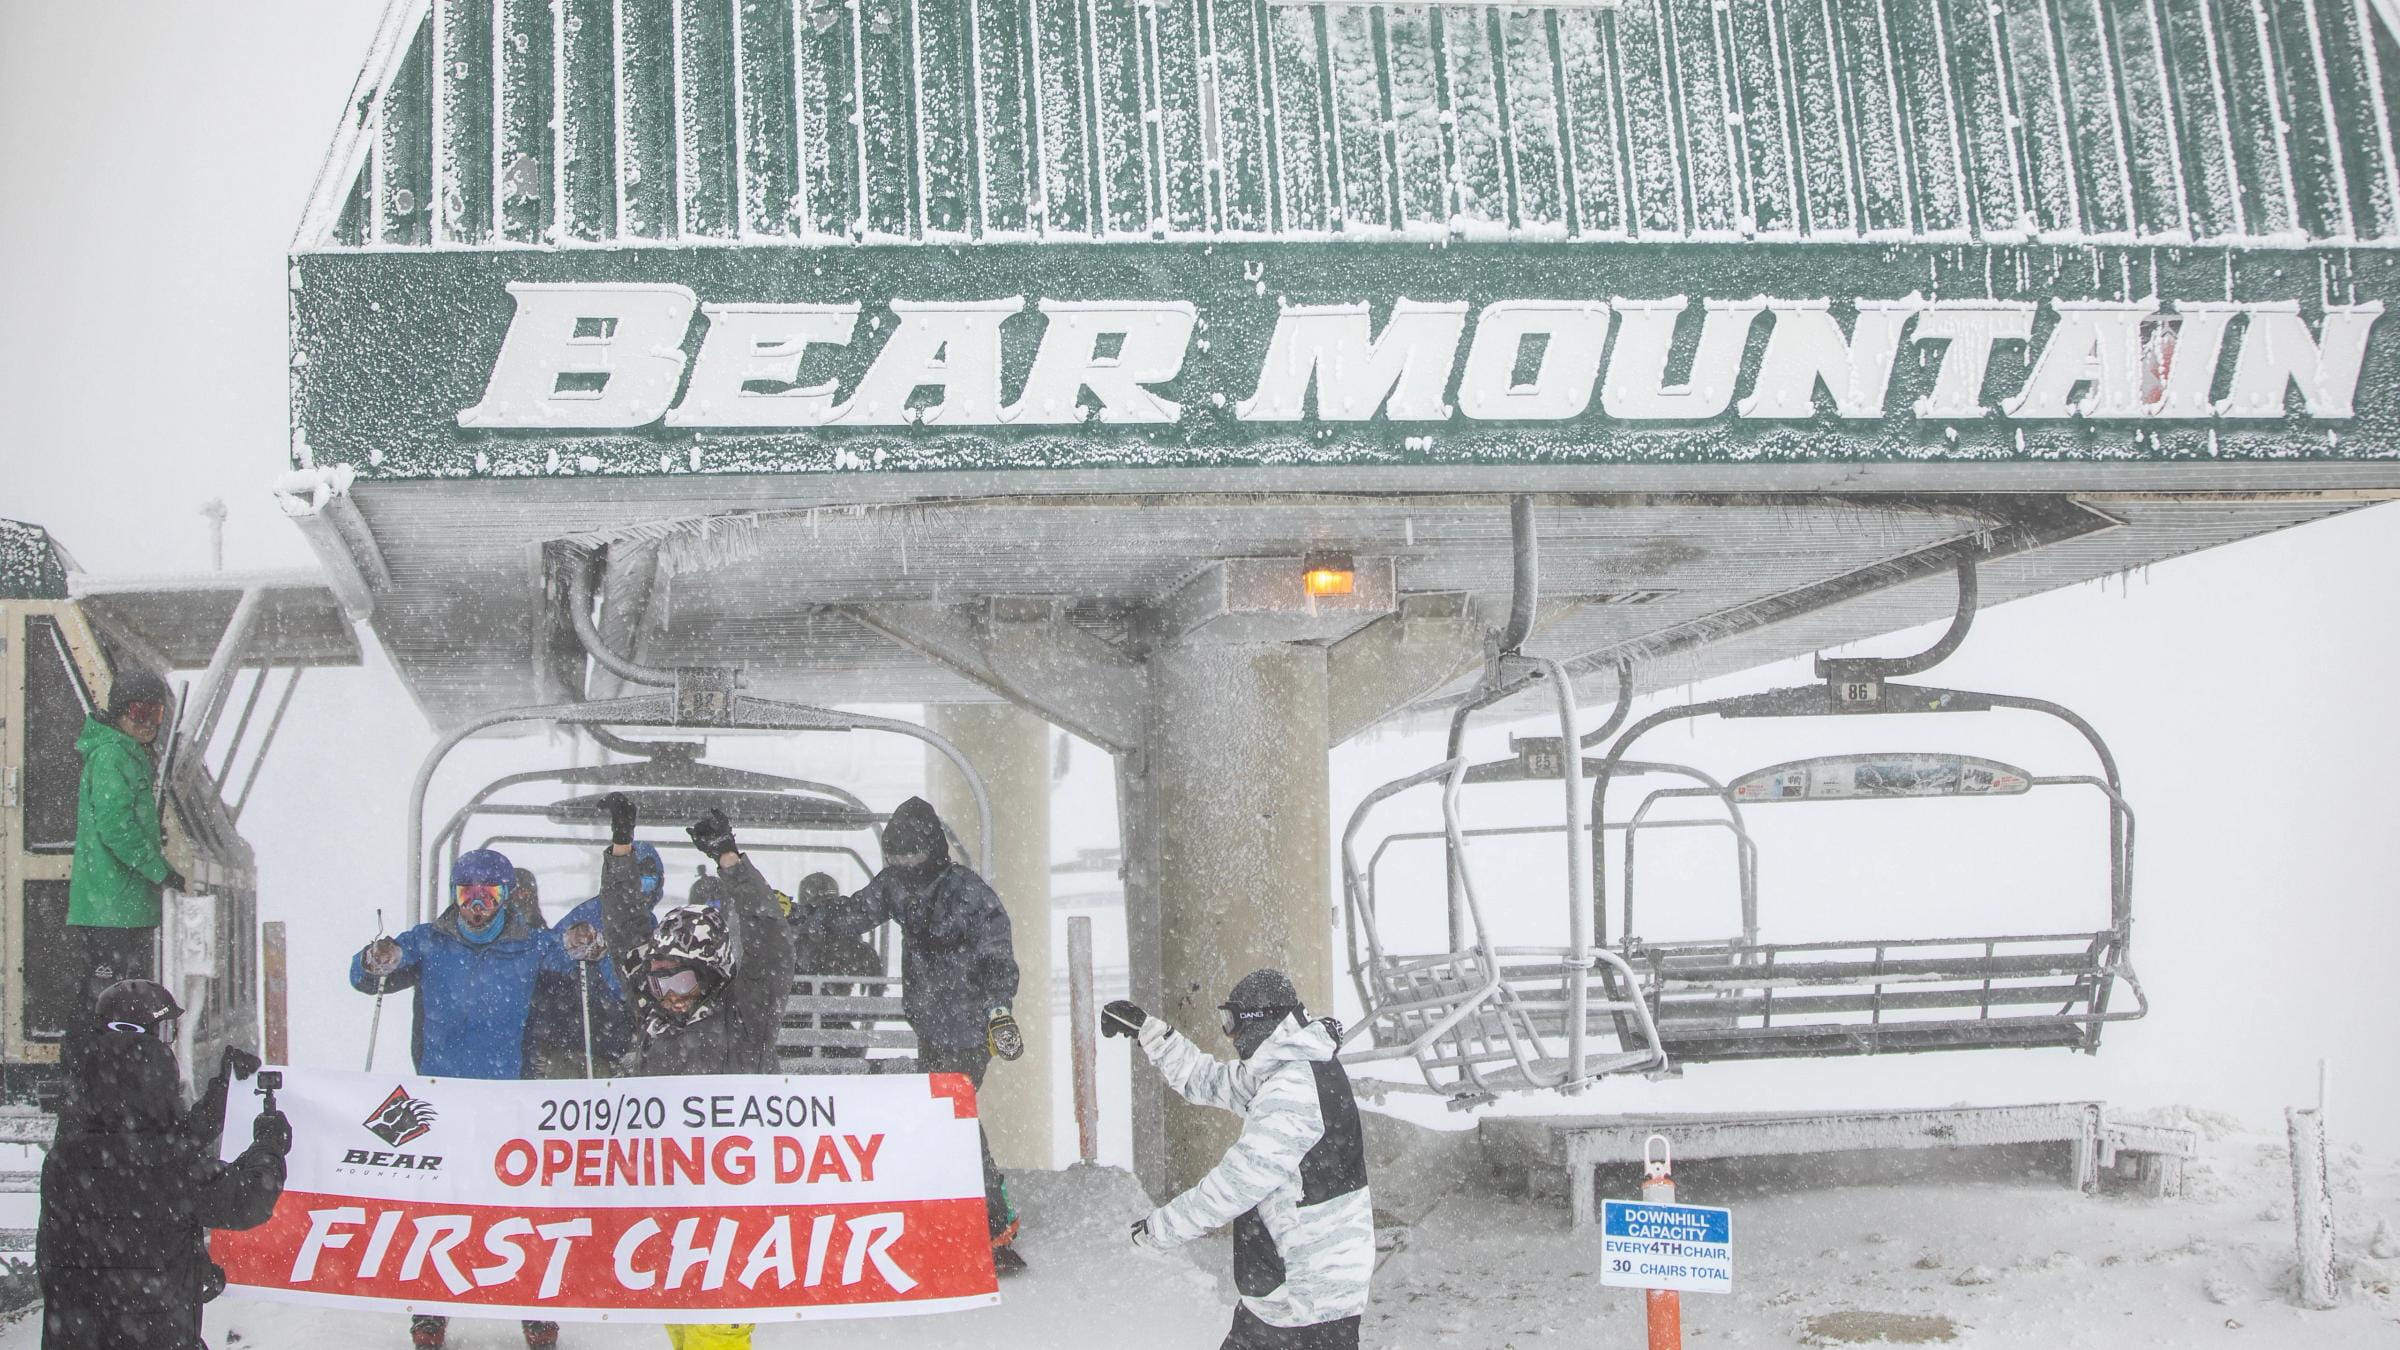 Group of people getting off chairlifts with a first chair sign.